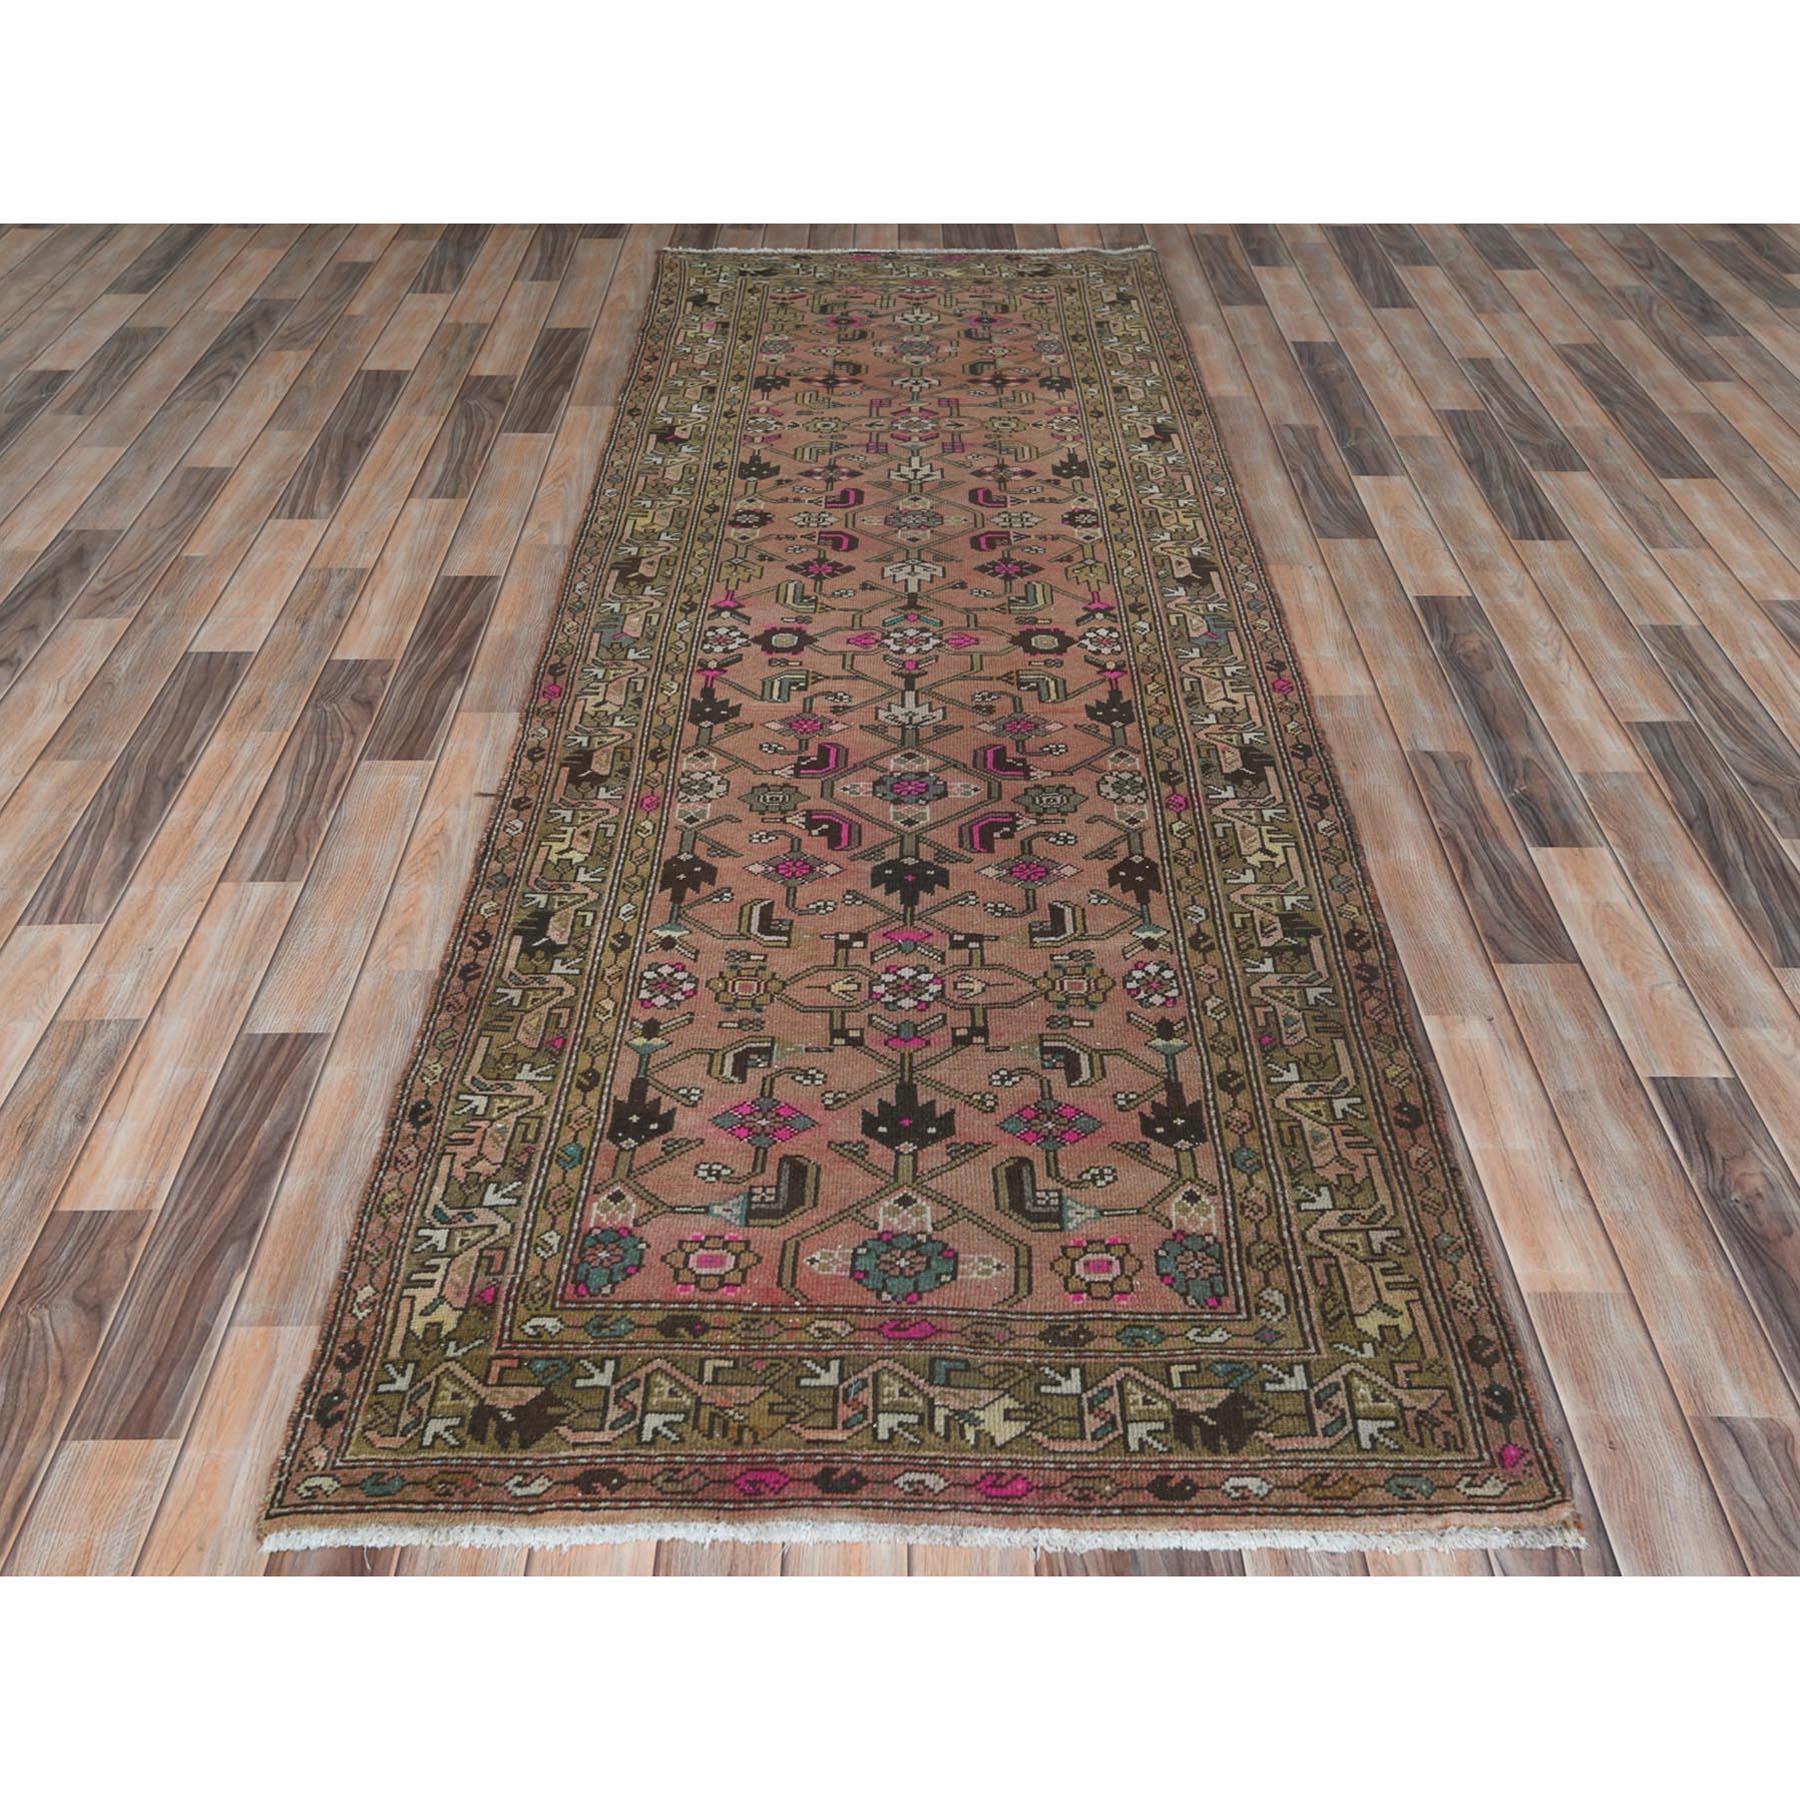 This fabulous hand-knotted carpet has been created and designed for extra strength and durability. This rug has been handcrafted for weeks in the traditional method that is used to make
Exact Rug Size in Feet and Inches: 3'5